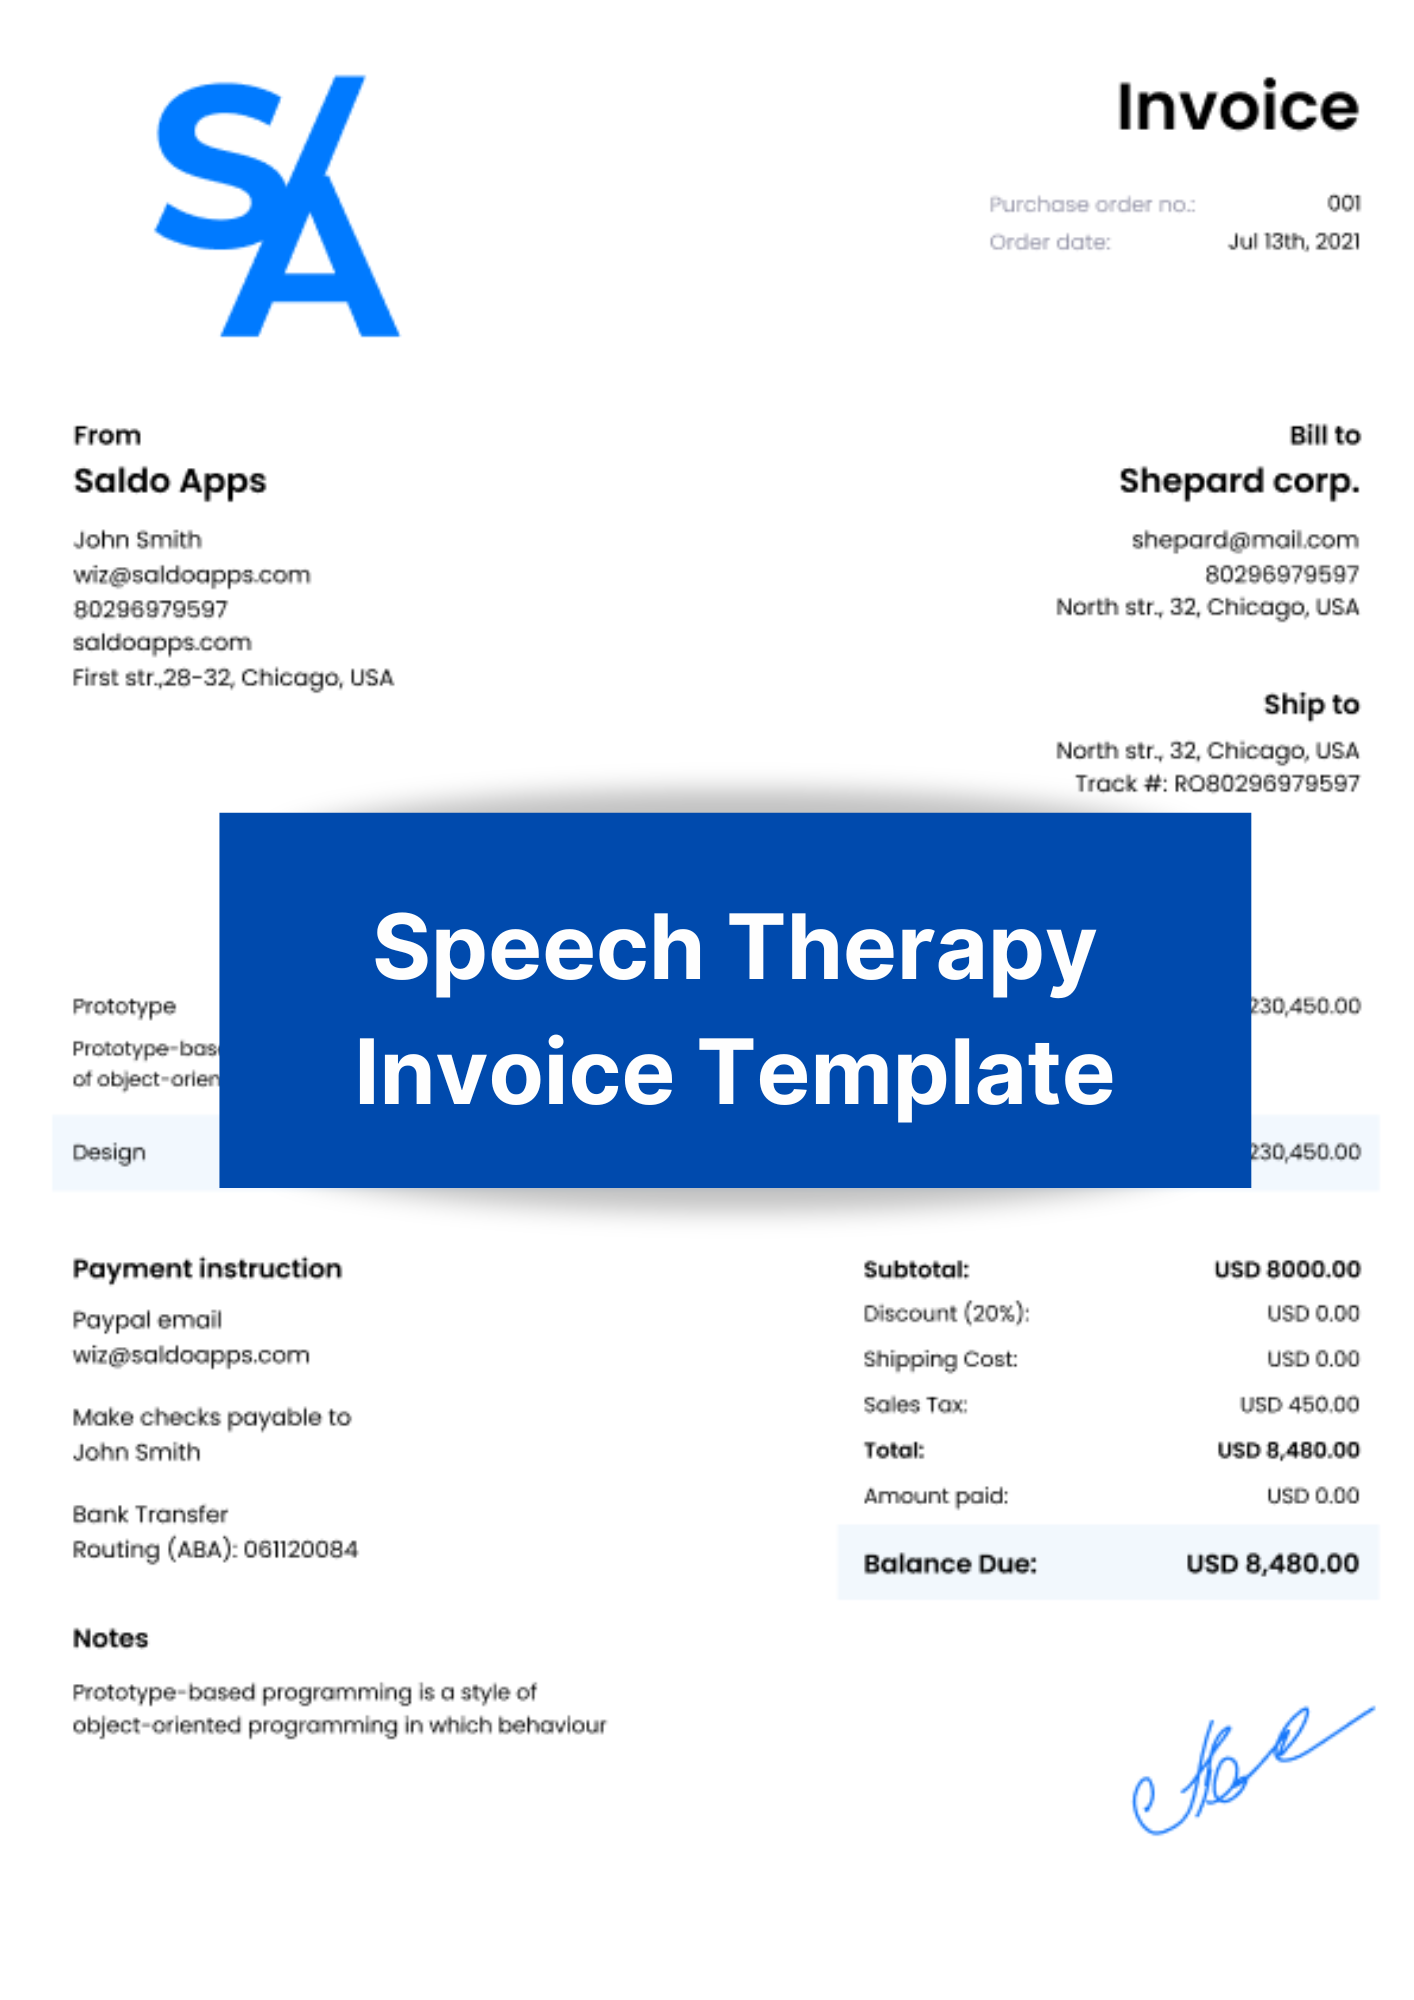 Speech Therapy Invoice Template